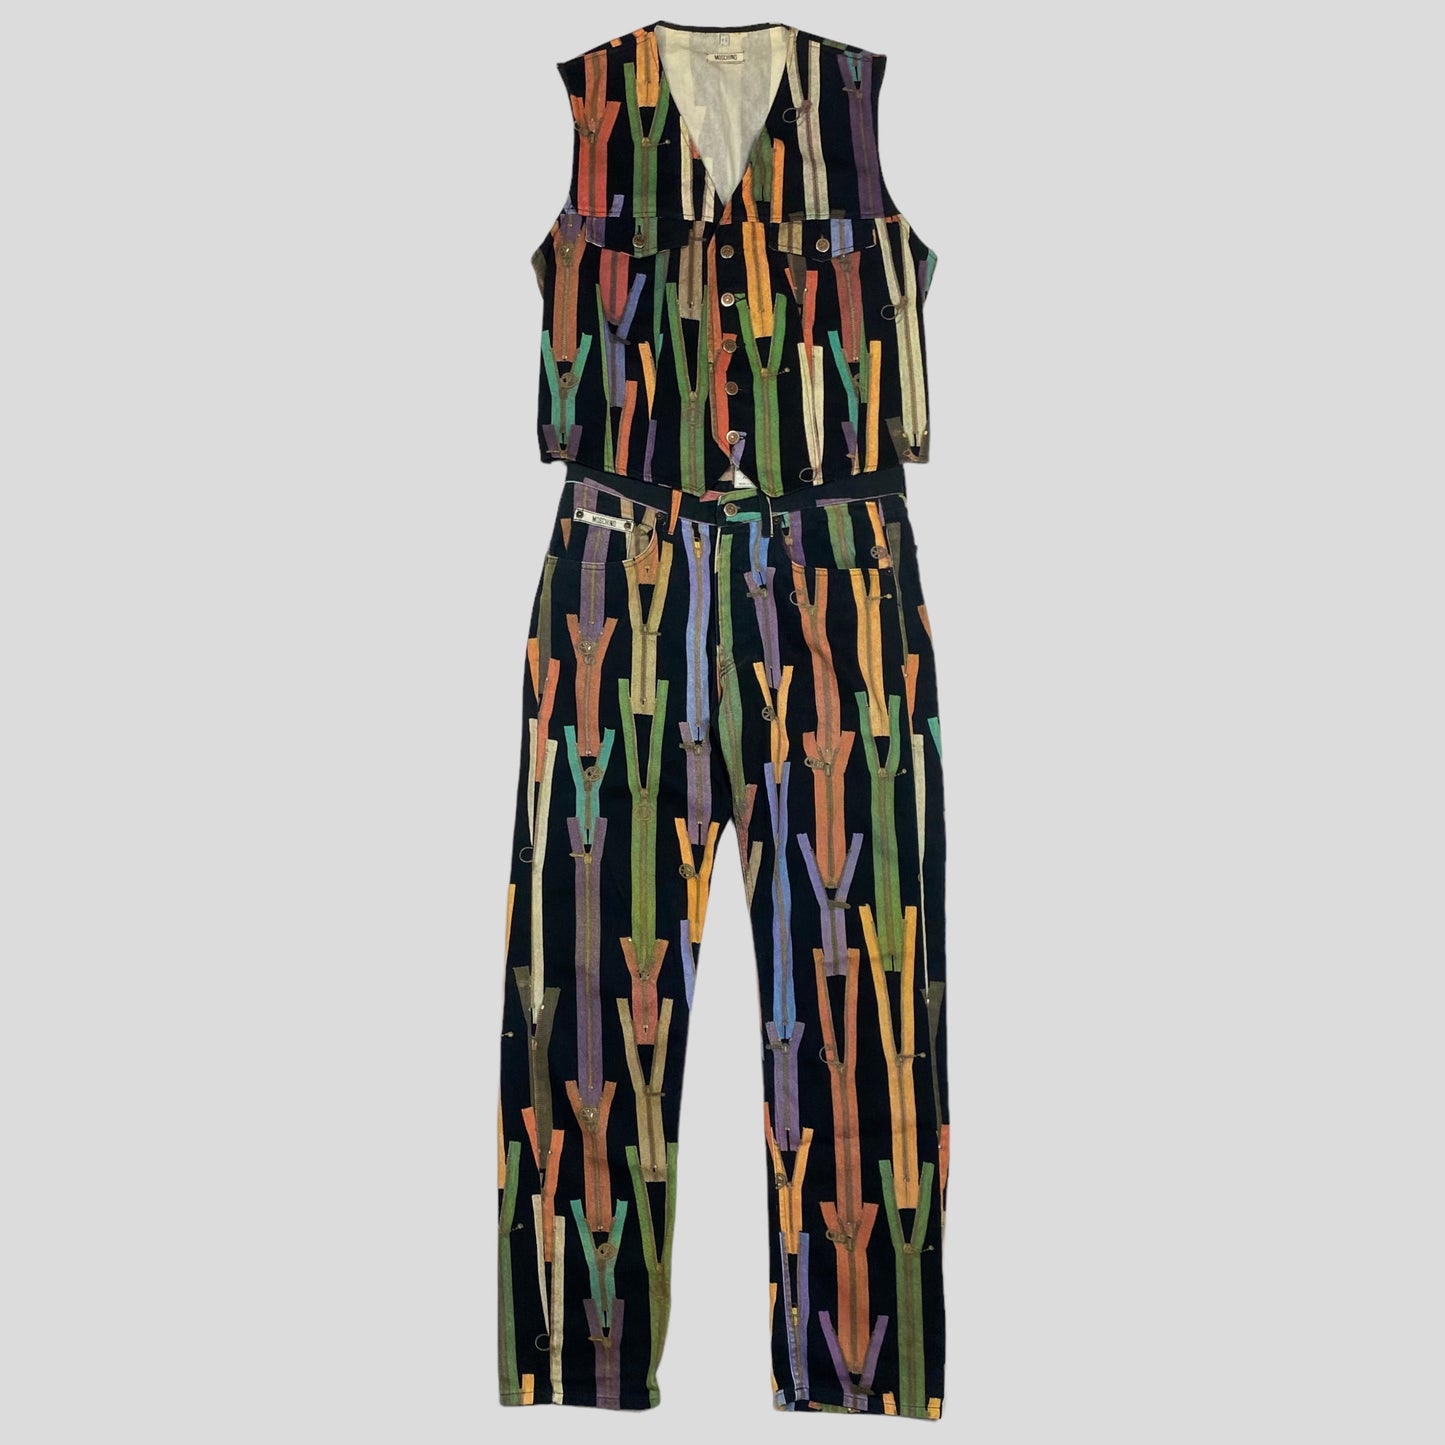 Moschino Jeans 1993 Zippers Waistcoat & Jeans Set - M-L & 34